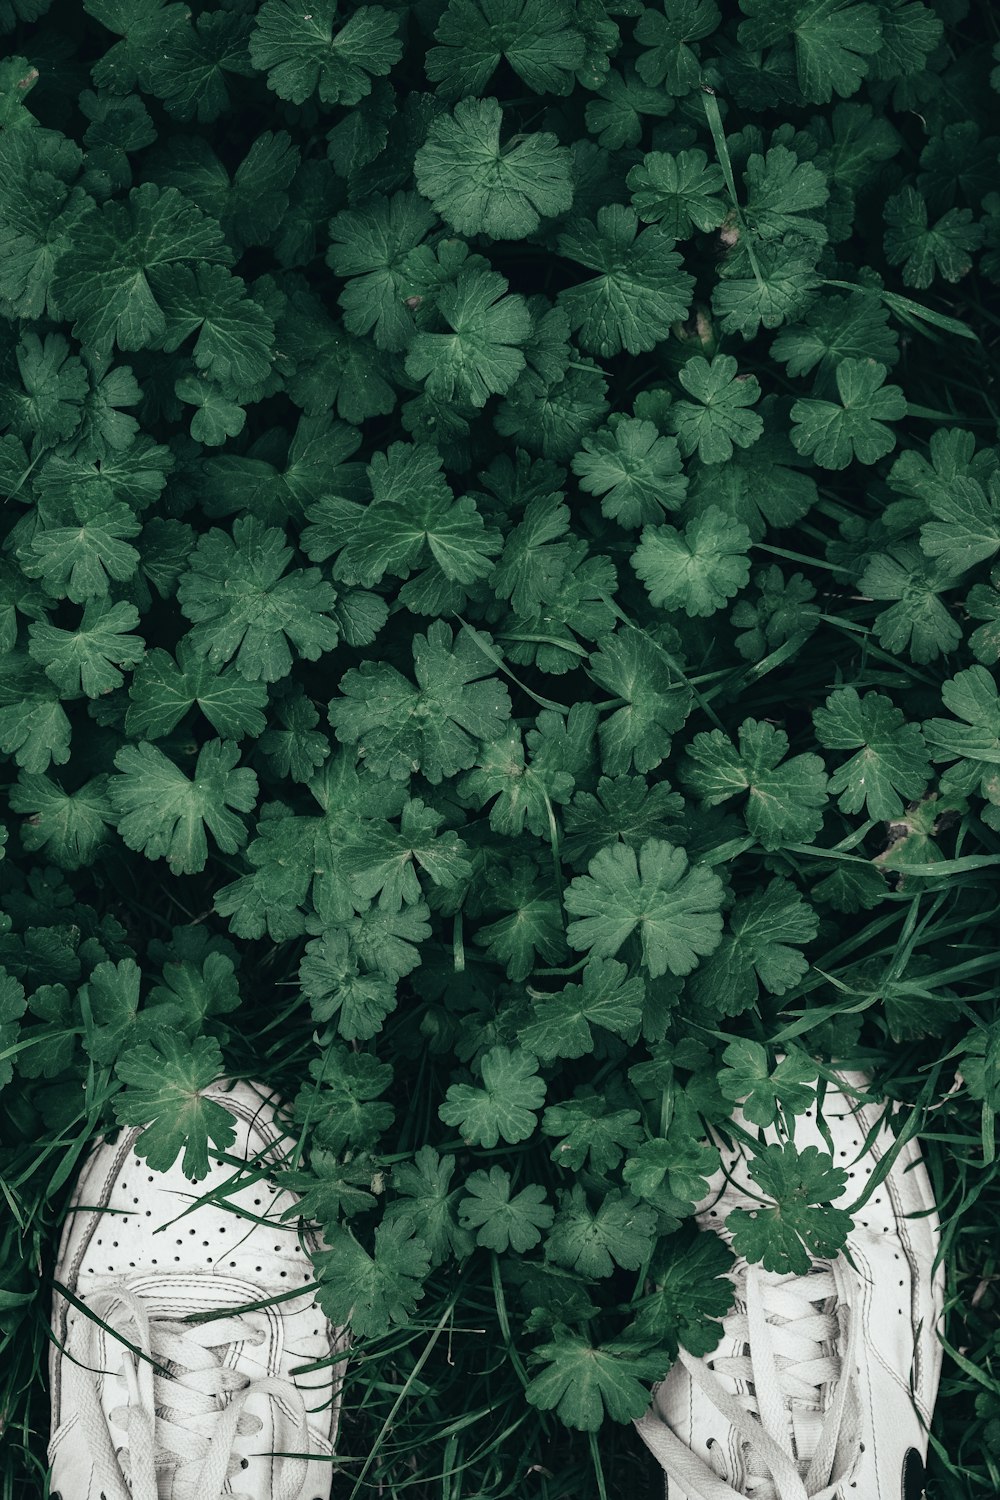 a pair of white tennis shoes sitting in the grass